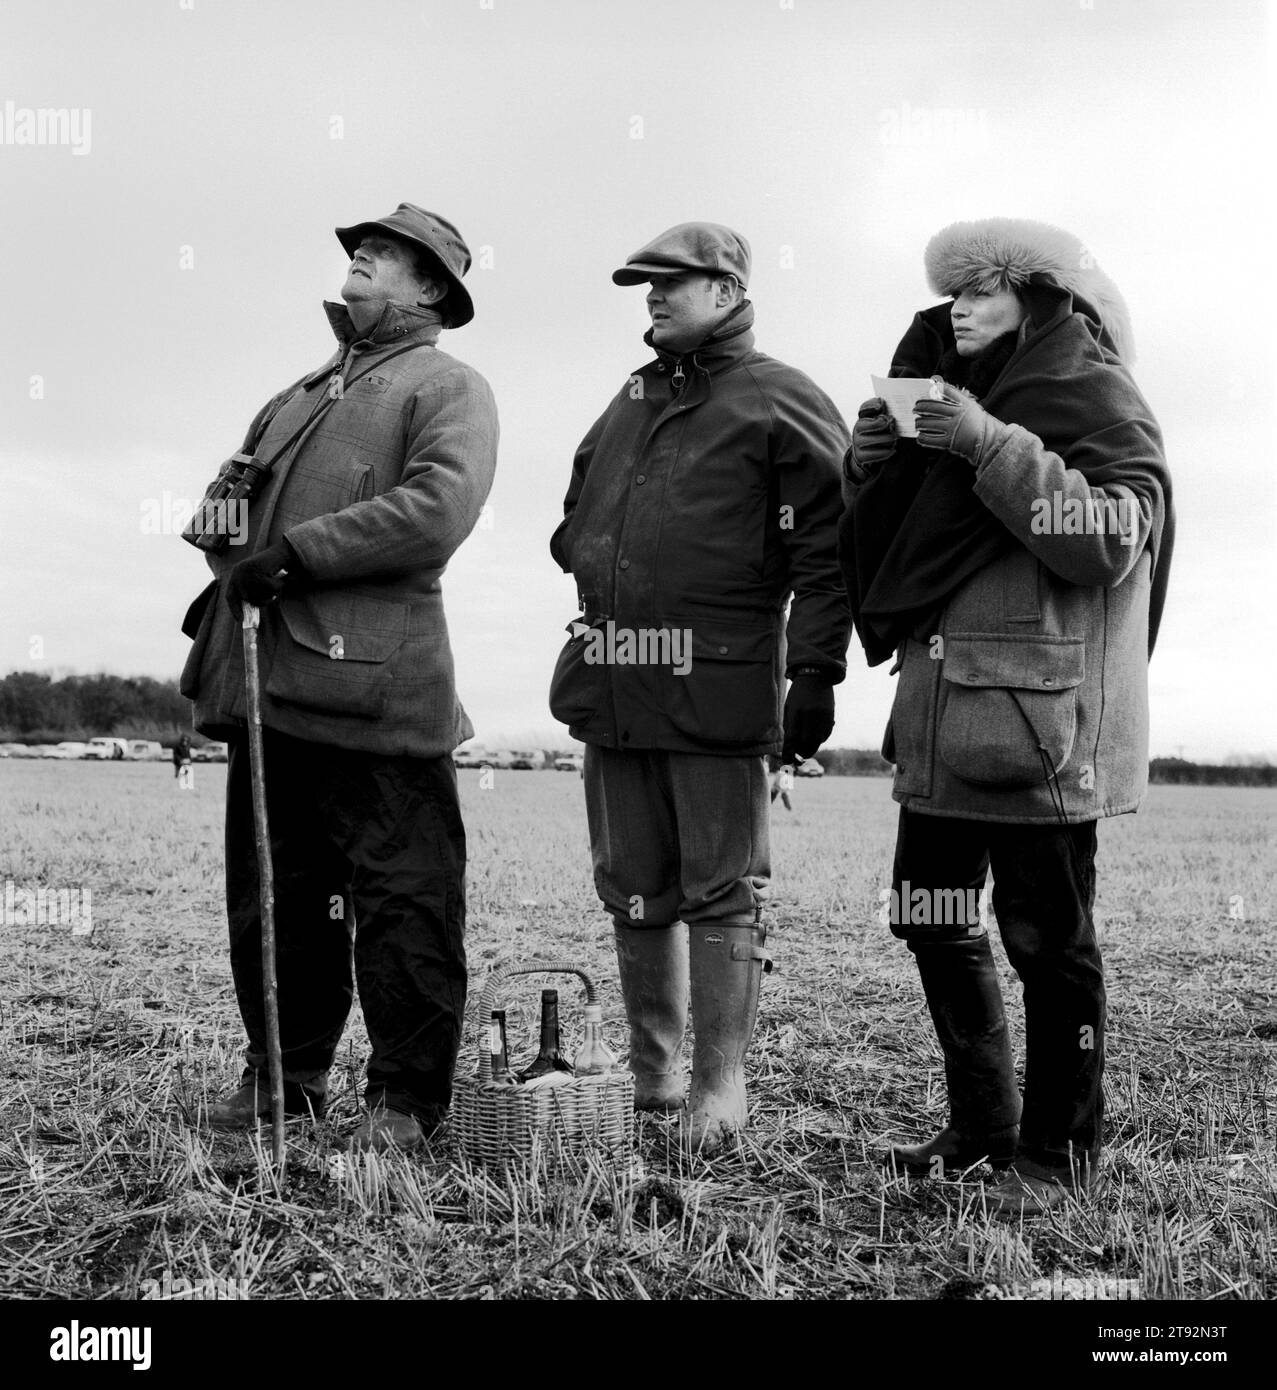 Hare Coursing 2000s UK , Spectators on a bitterly cold February day members of the Swaffham Coursing Club meet near Narborough, Norfolk. UK England 2002 2000s HOMER SYKES Stock Photo